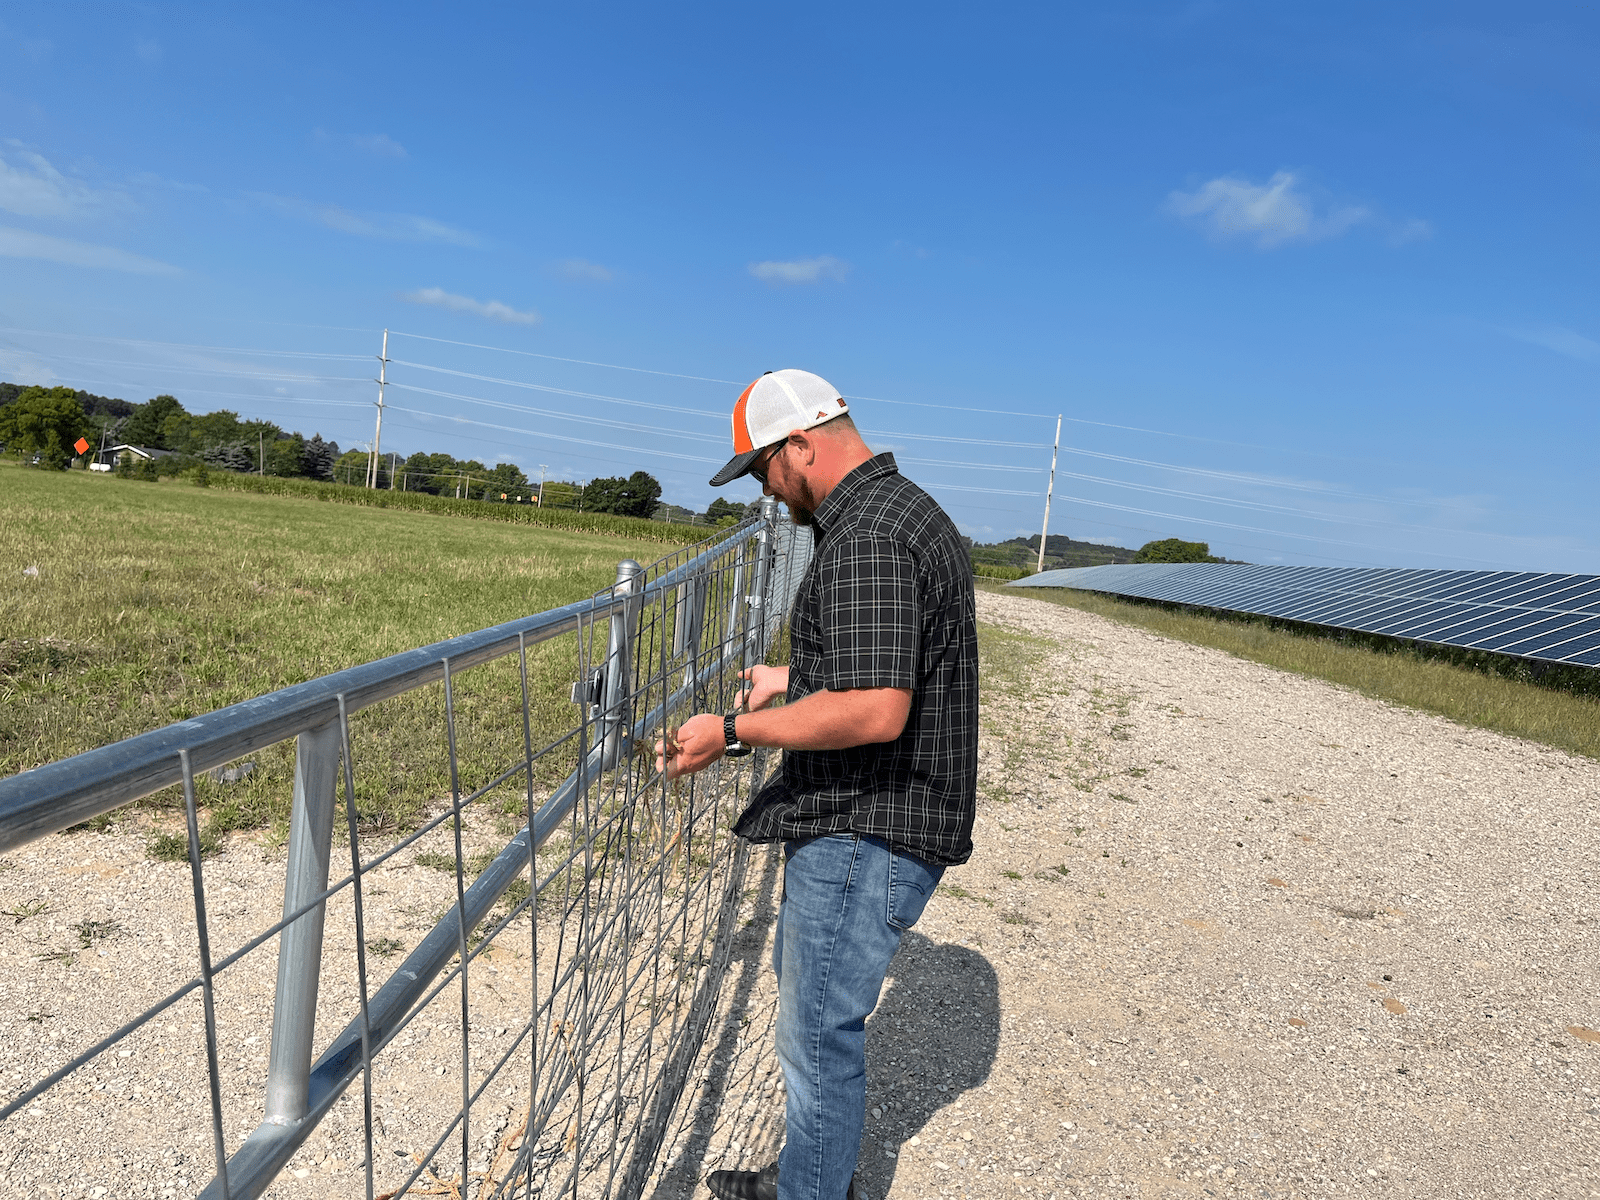 Man in white trucker's cap and short-sleeve shirt stands on farmland and closes metal gate.